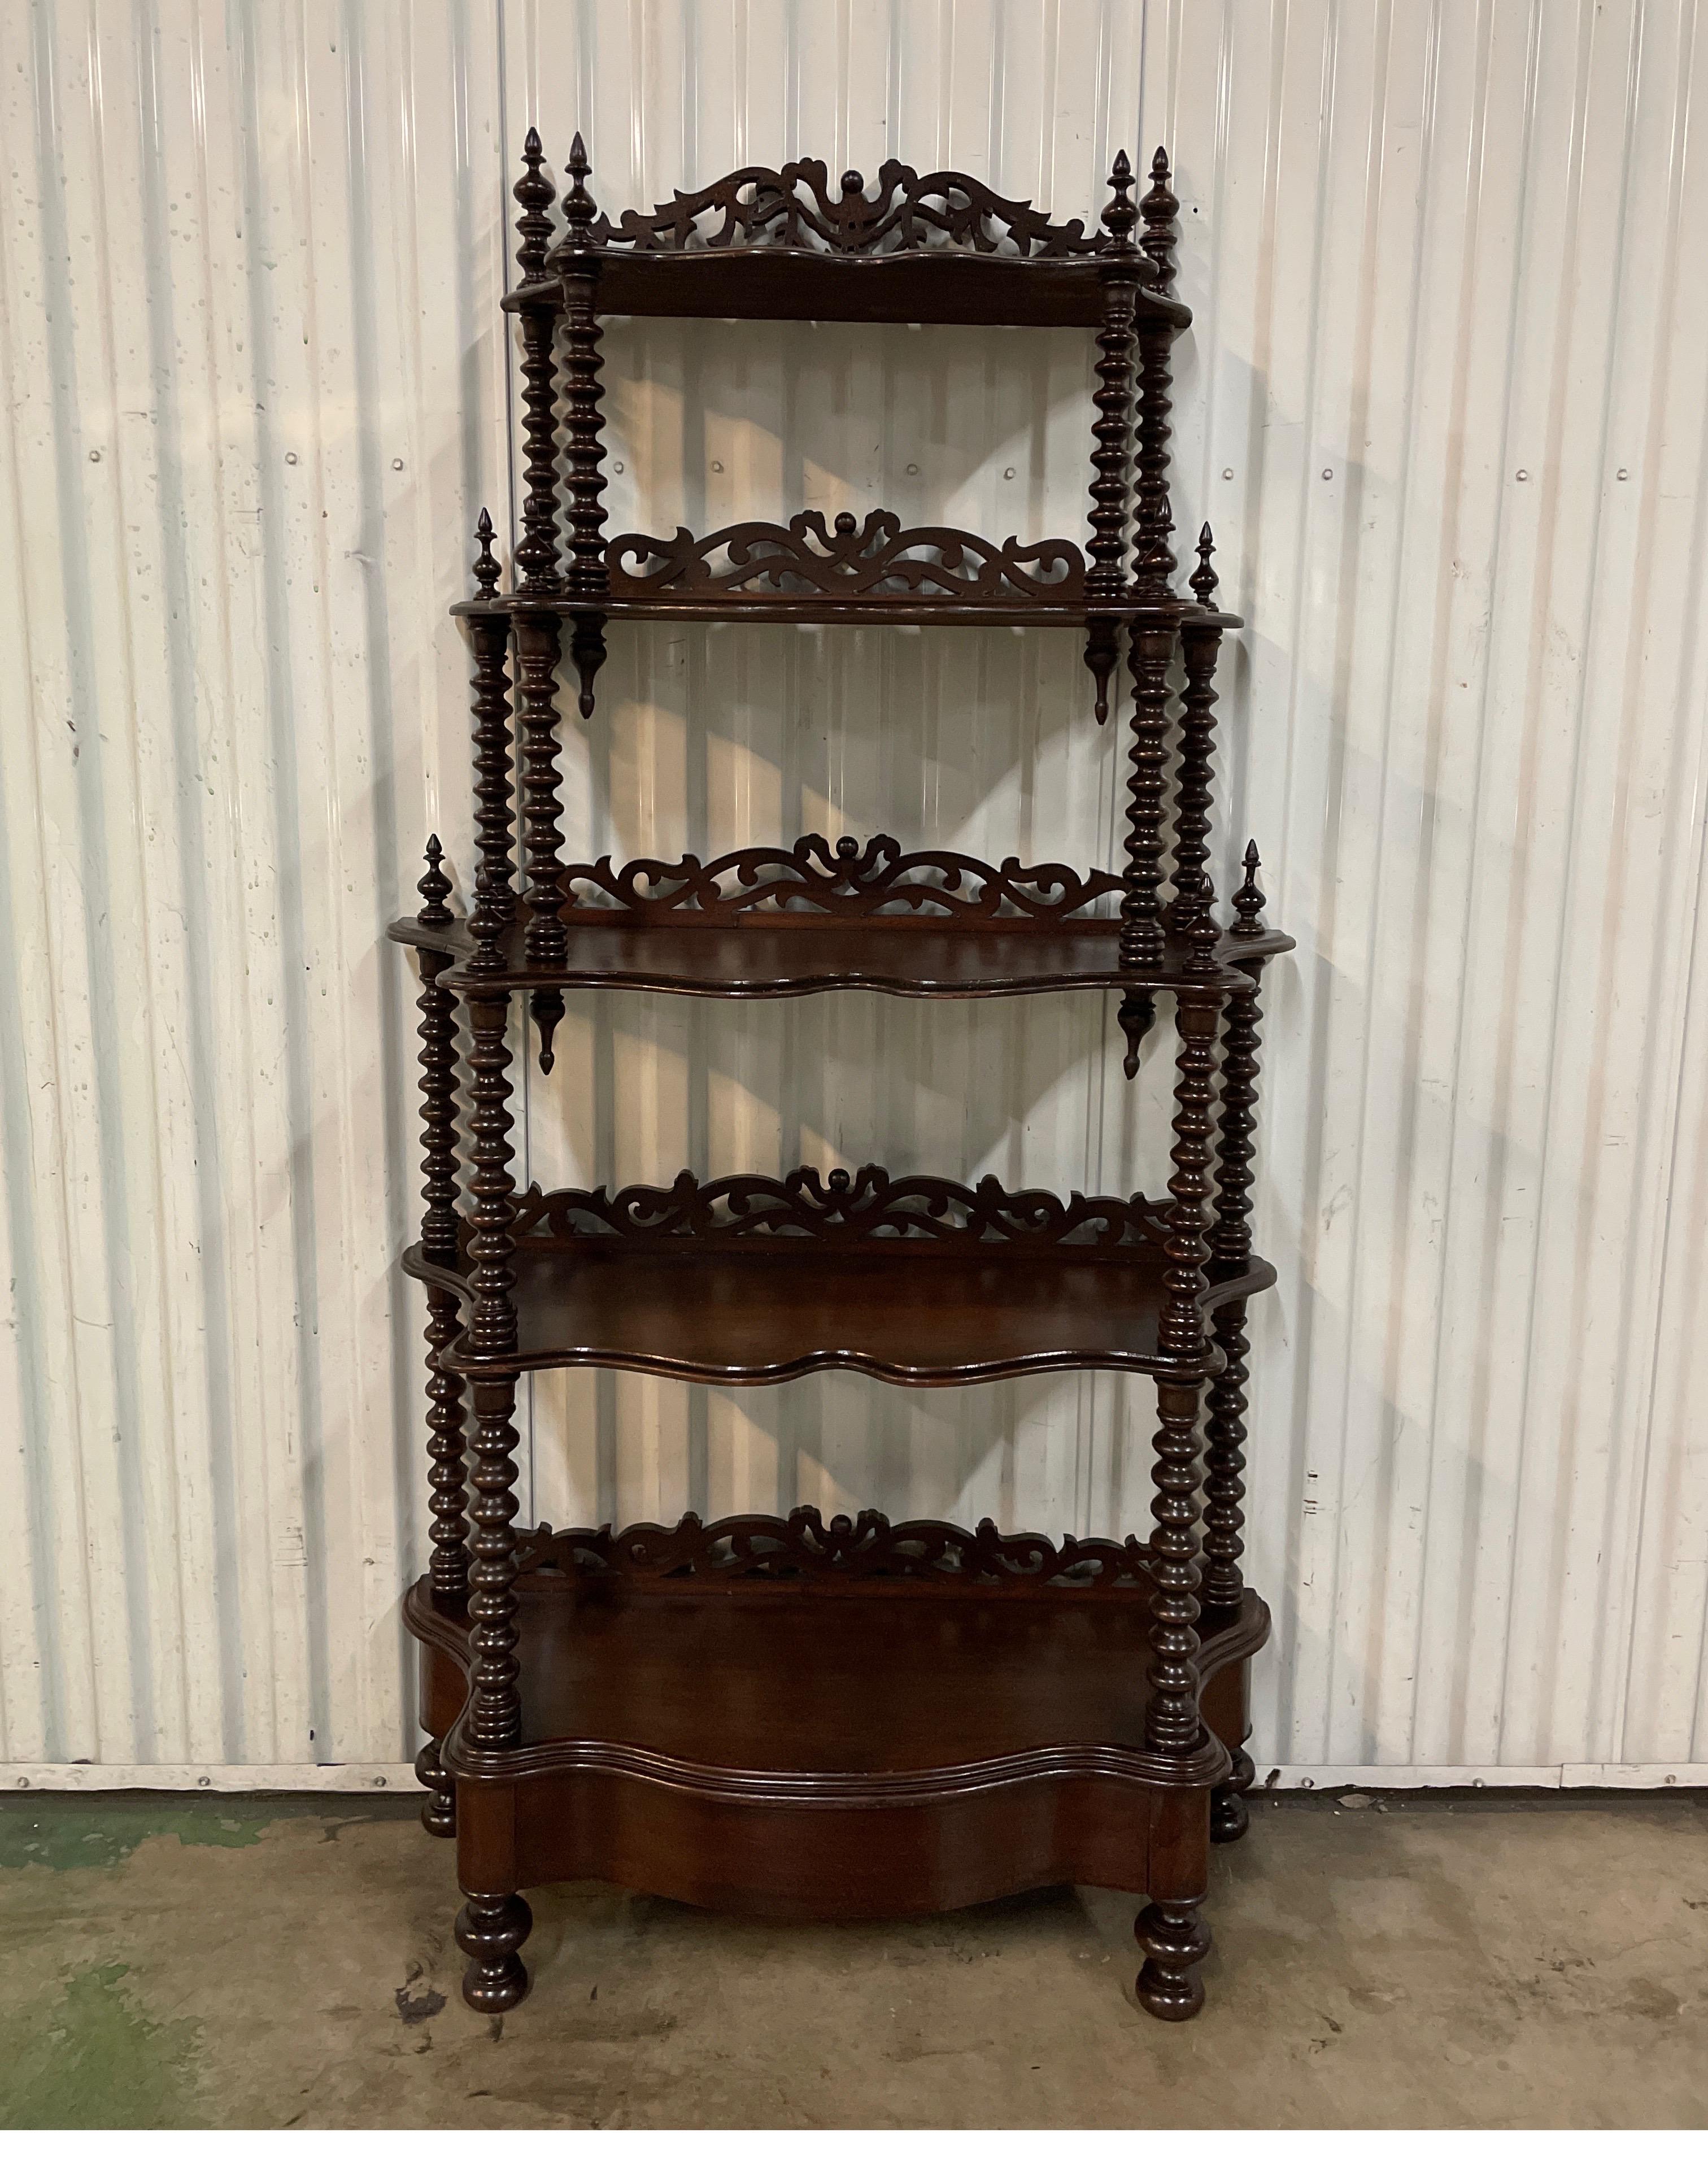 19th century five tier graduated etagere / shelf with barley twist legs topped with hand carved finials. Each shelf is backed with carved stop.